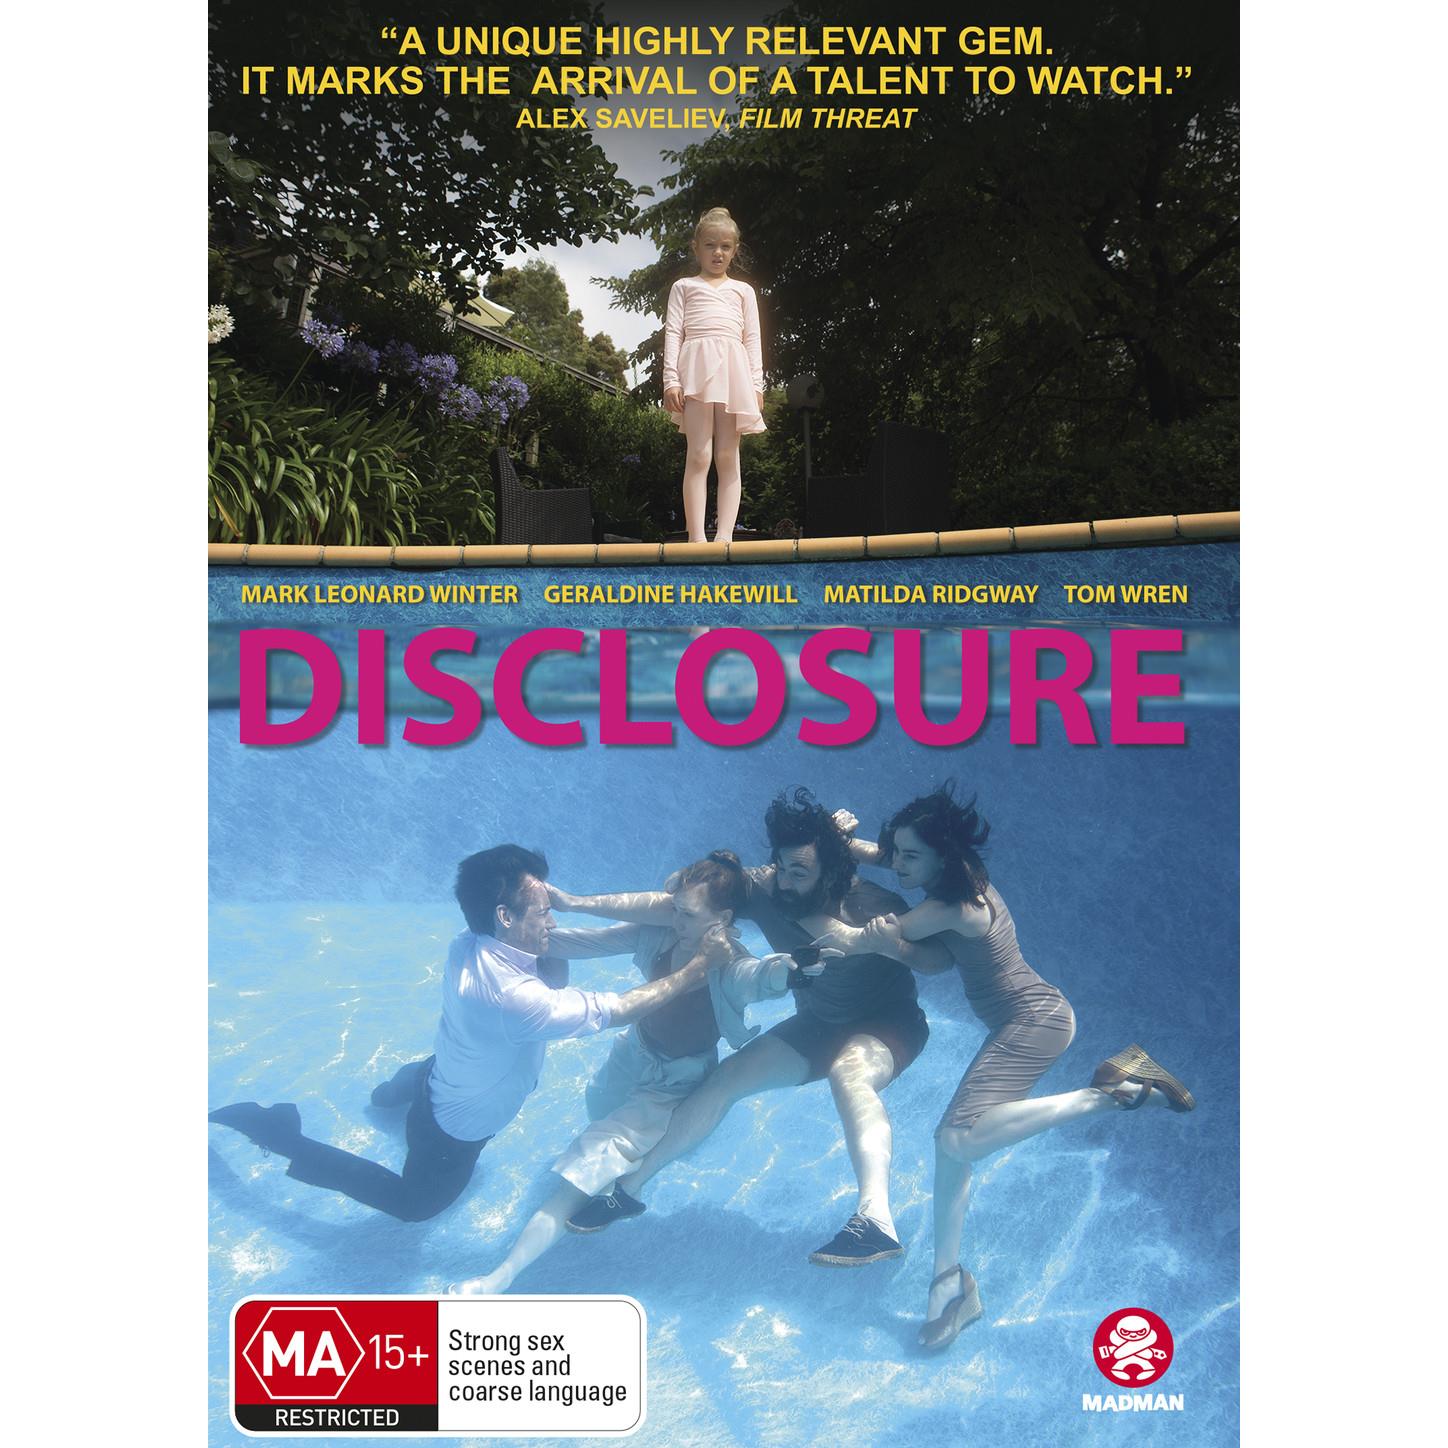 Full Disclosure Movie Streaming Online Watch